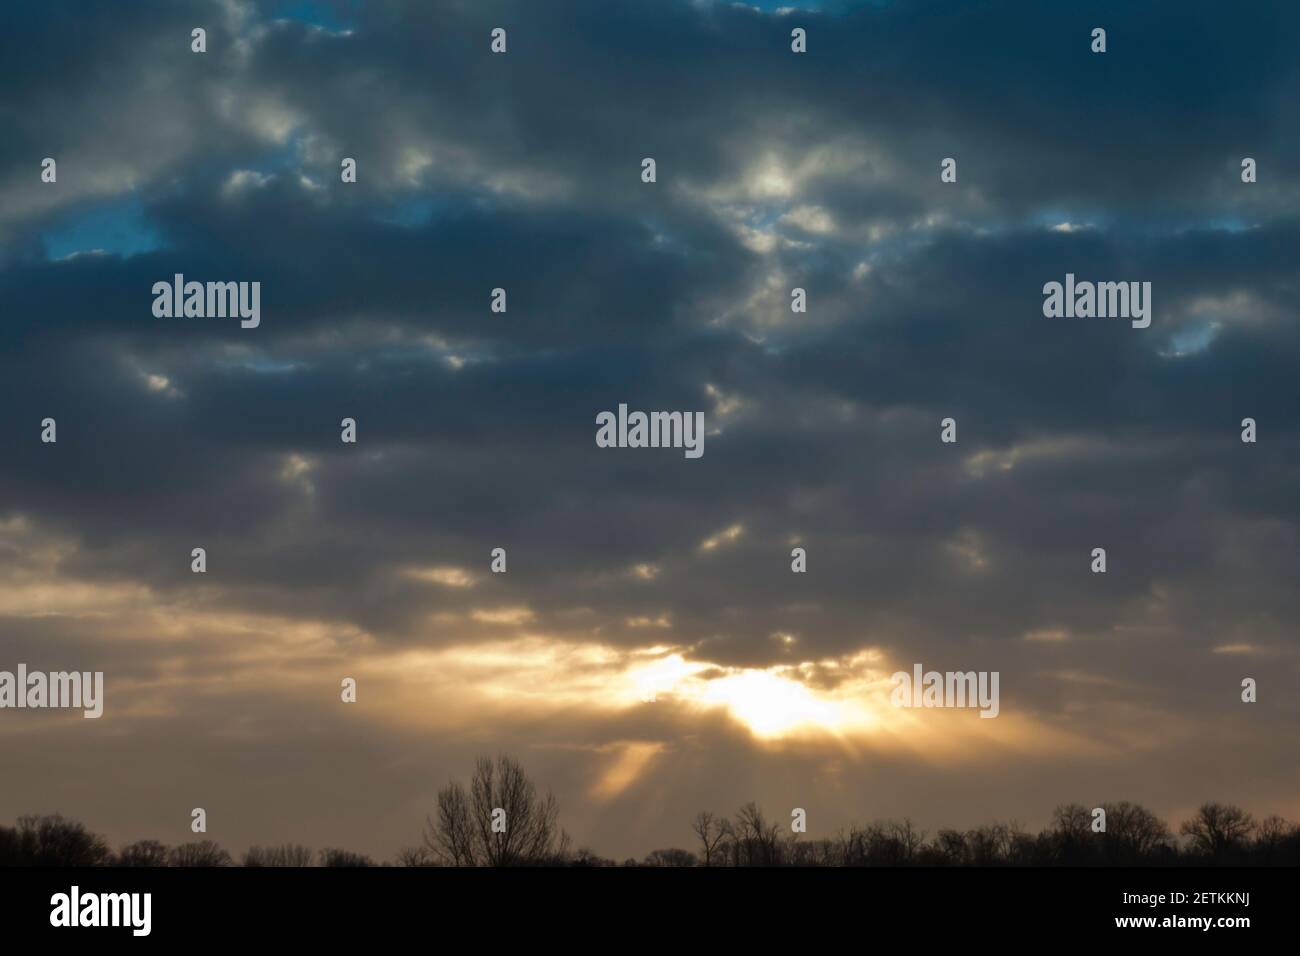 mystical heavenly sky with sun rays coming out from behind clouds Stock Photo